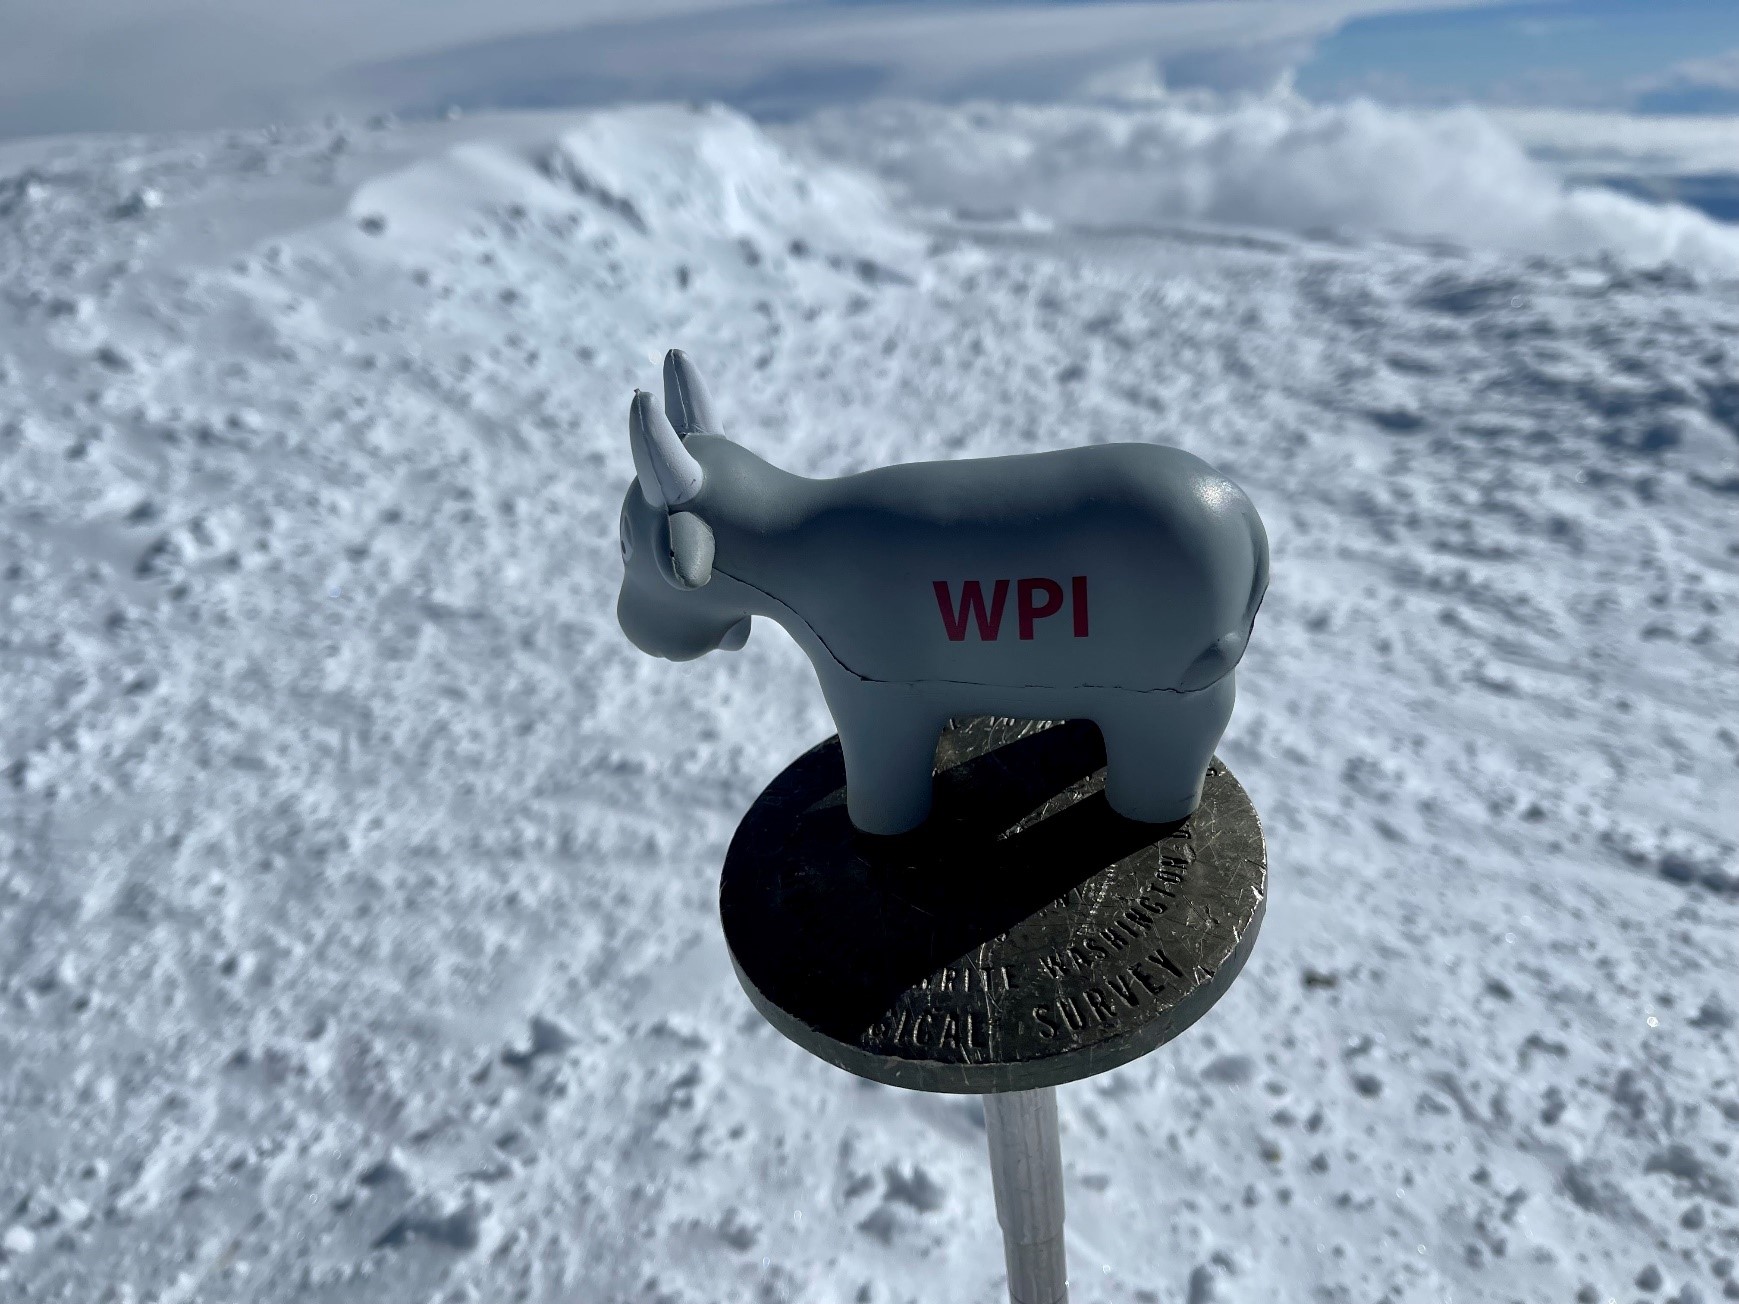 Gompei sits on the summit marker atop Denali, more than 20,000 feet above sea level